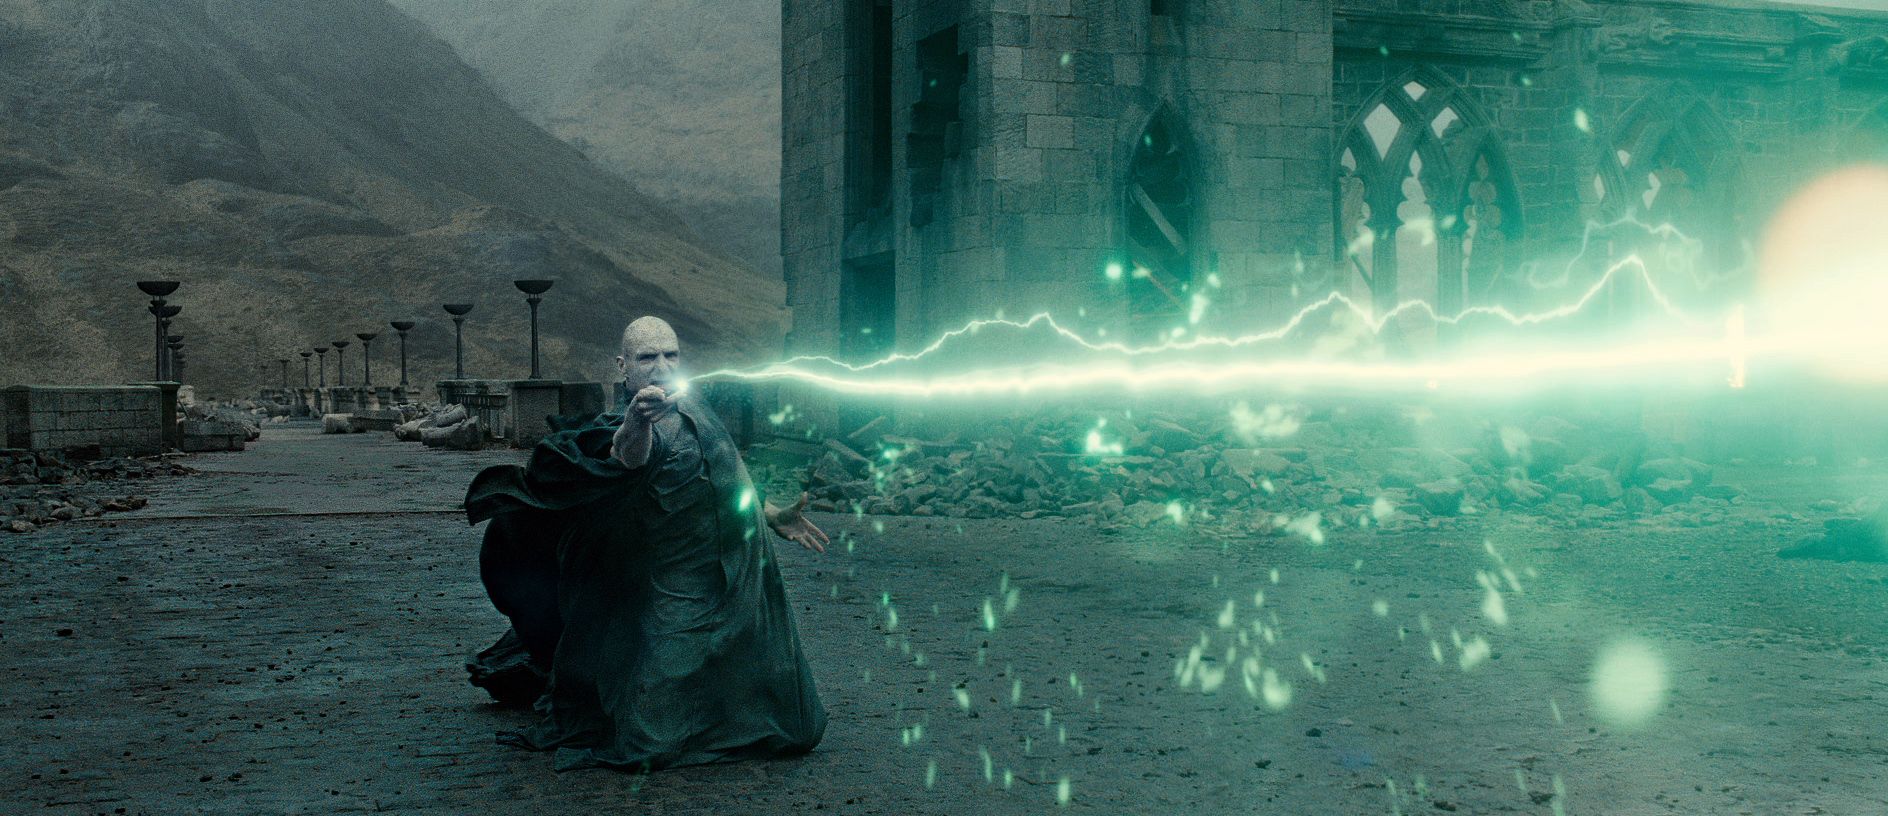 Harry Potter and the Deathly Hallows - Part 2 Photo #2